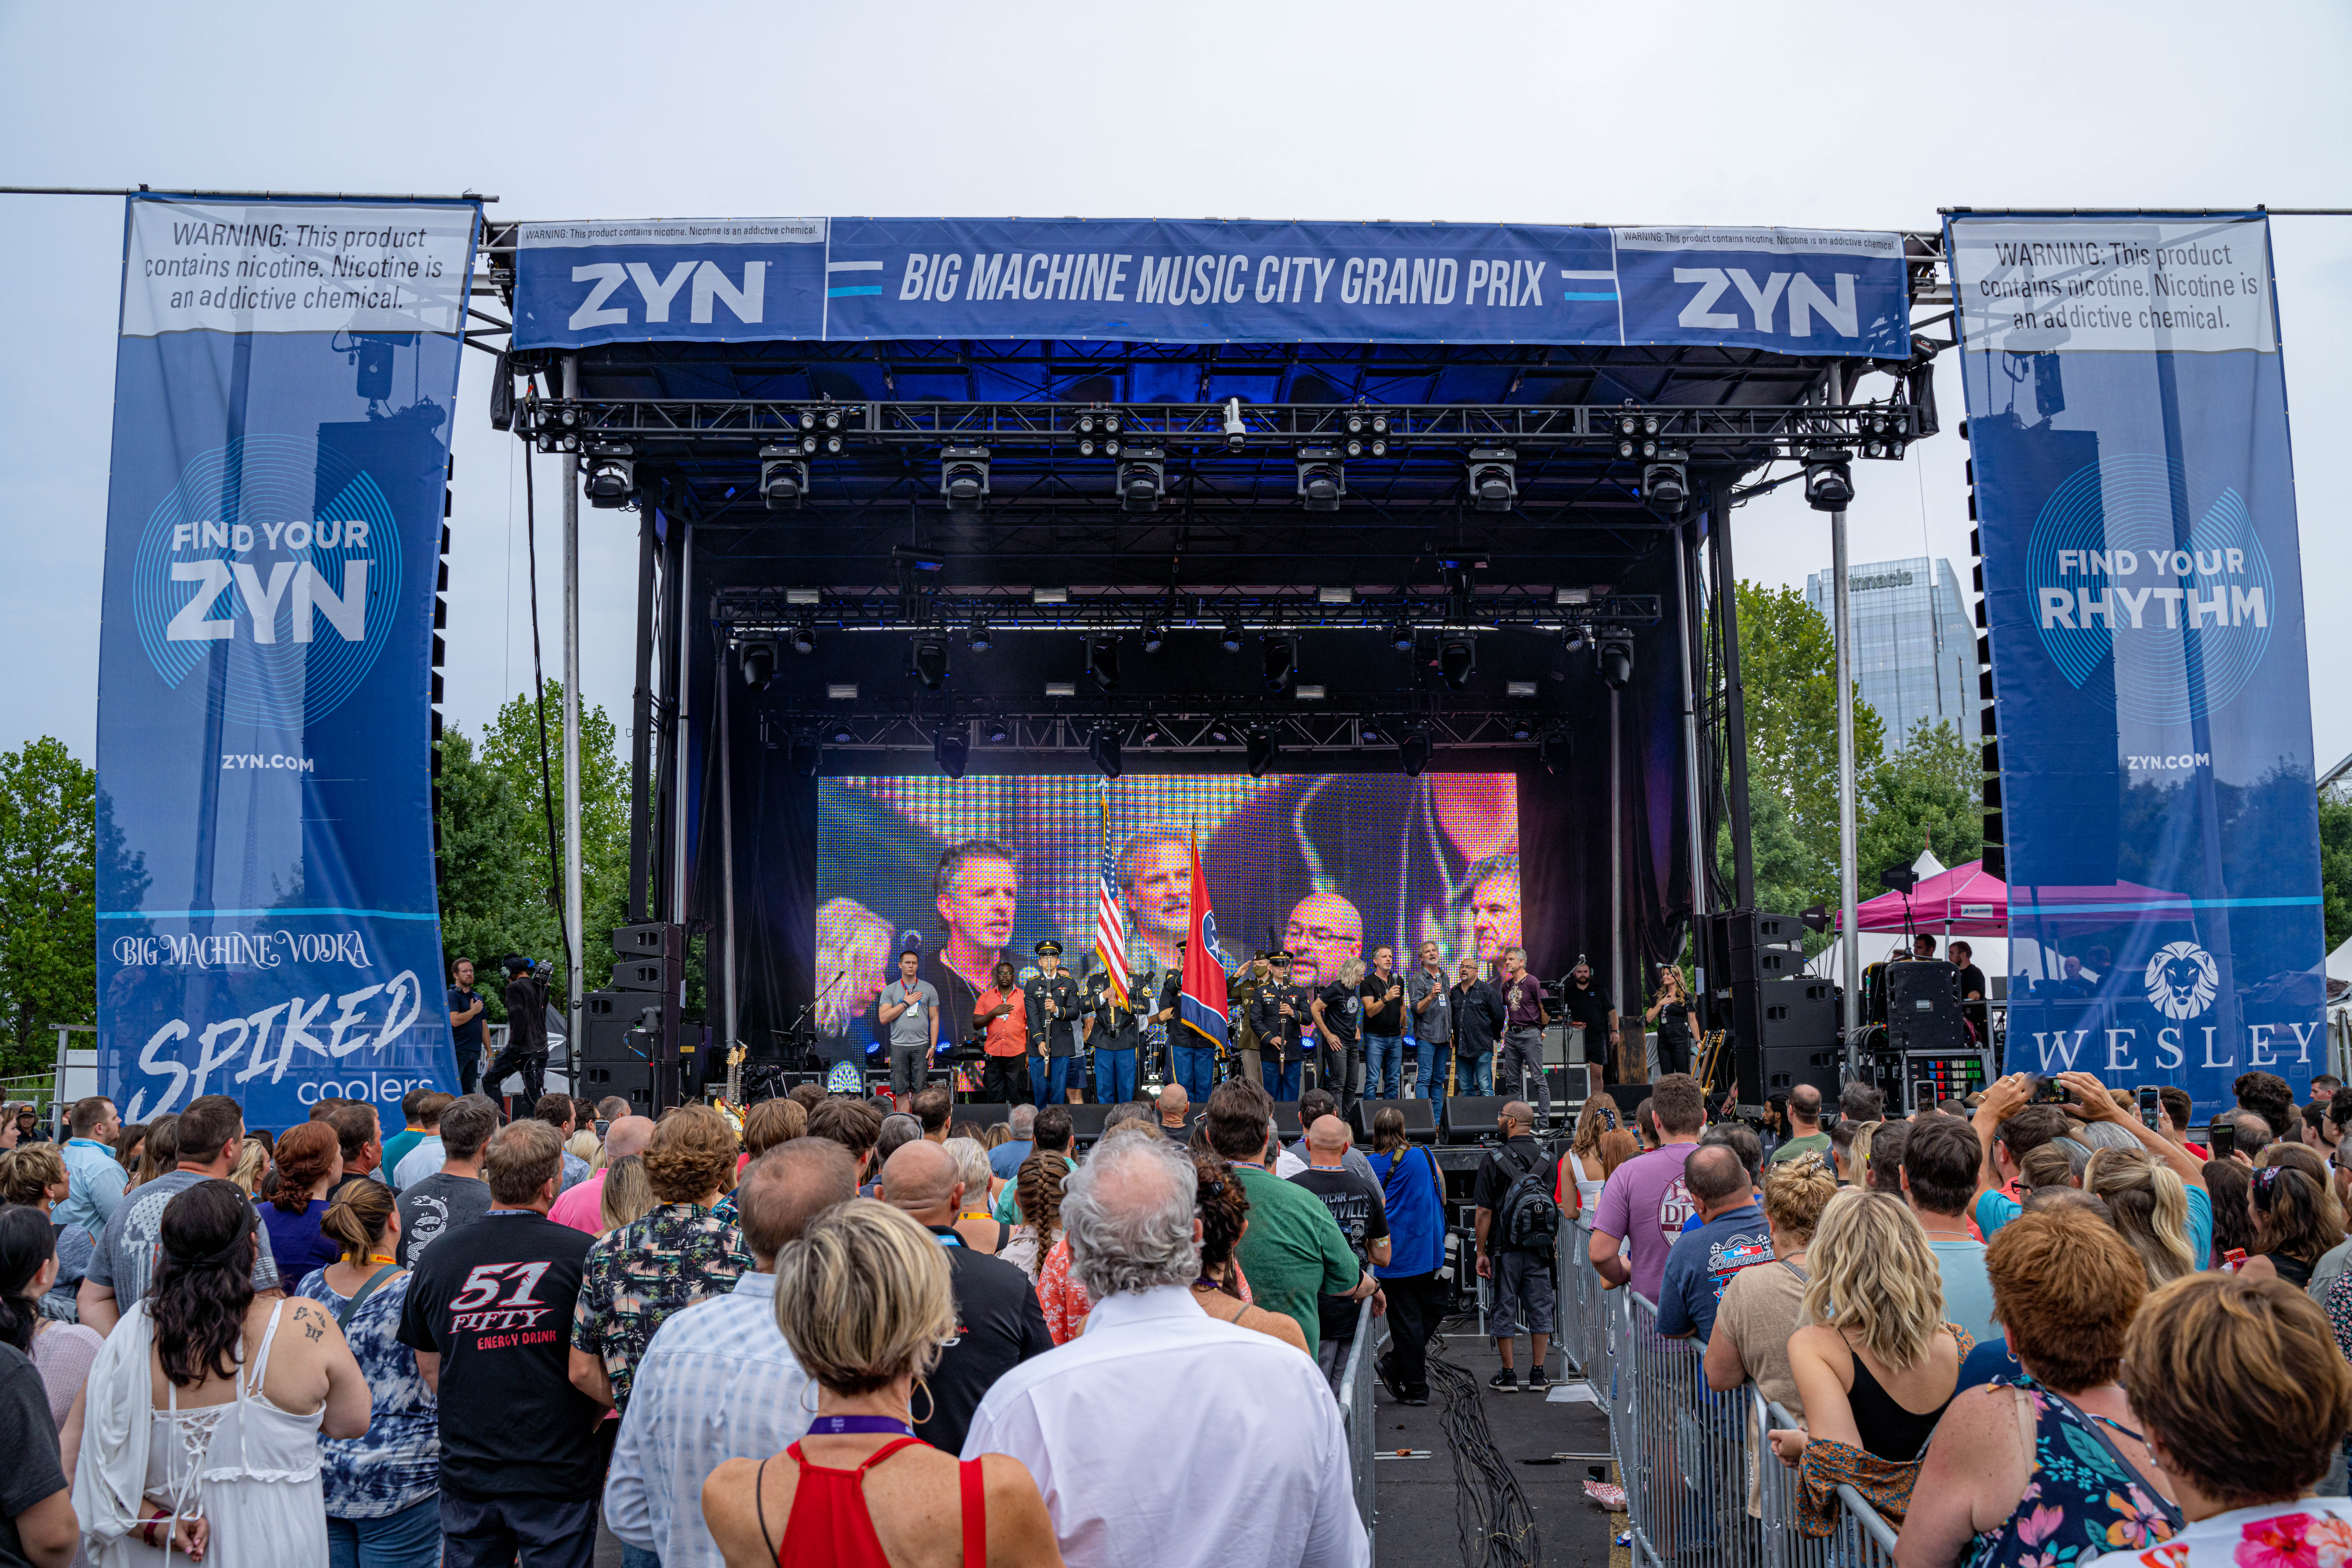 People gathered at ZYN main stage by BMG